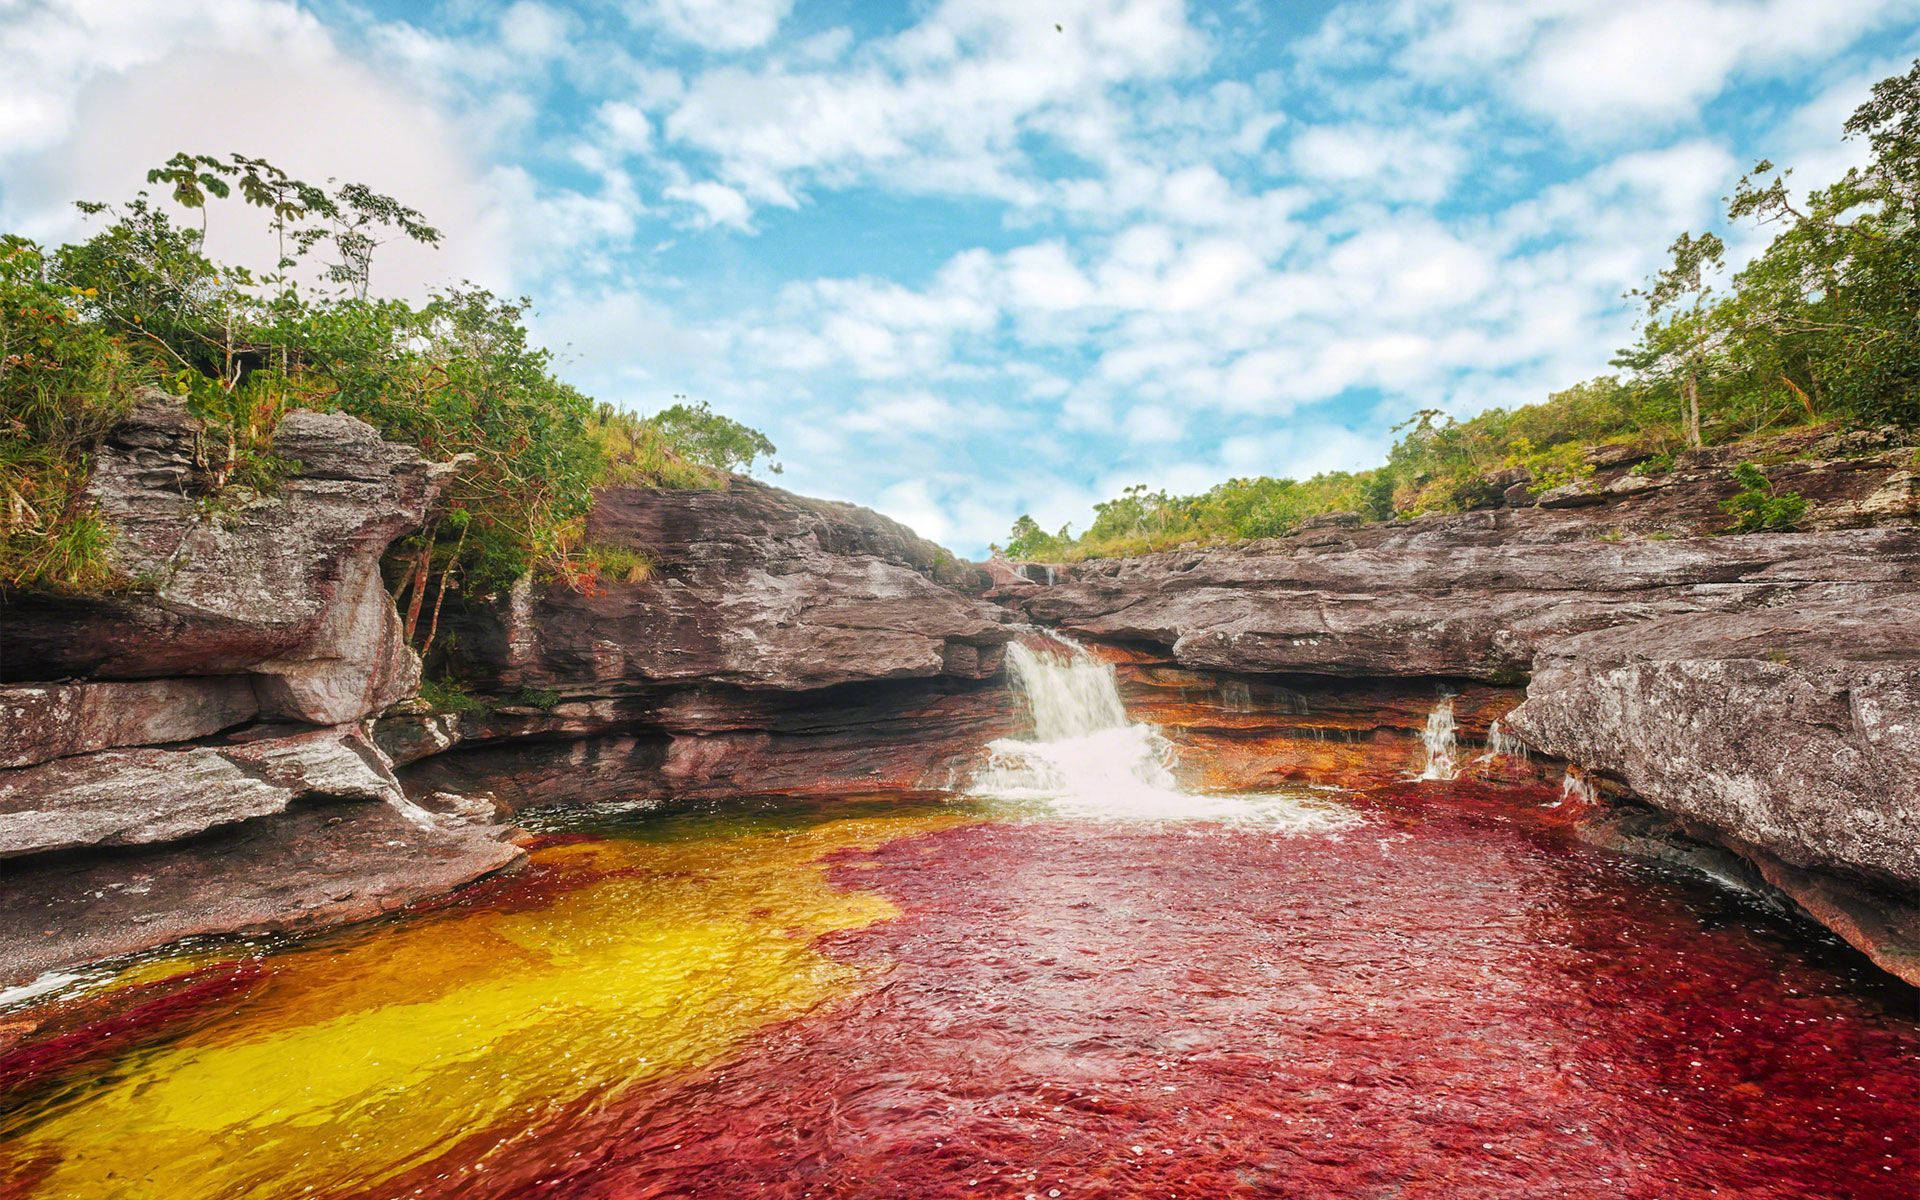 Caño Cristales In Colombia